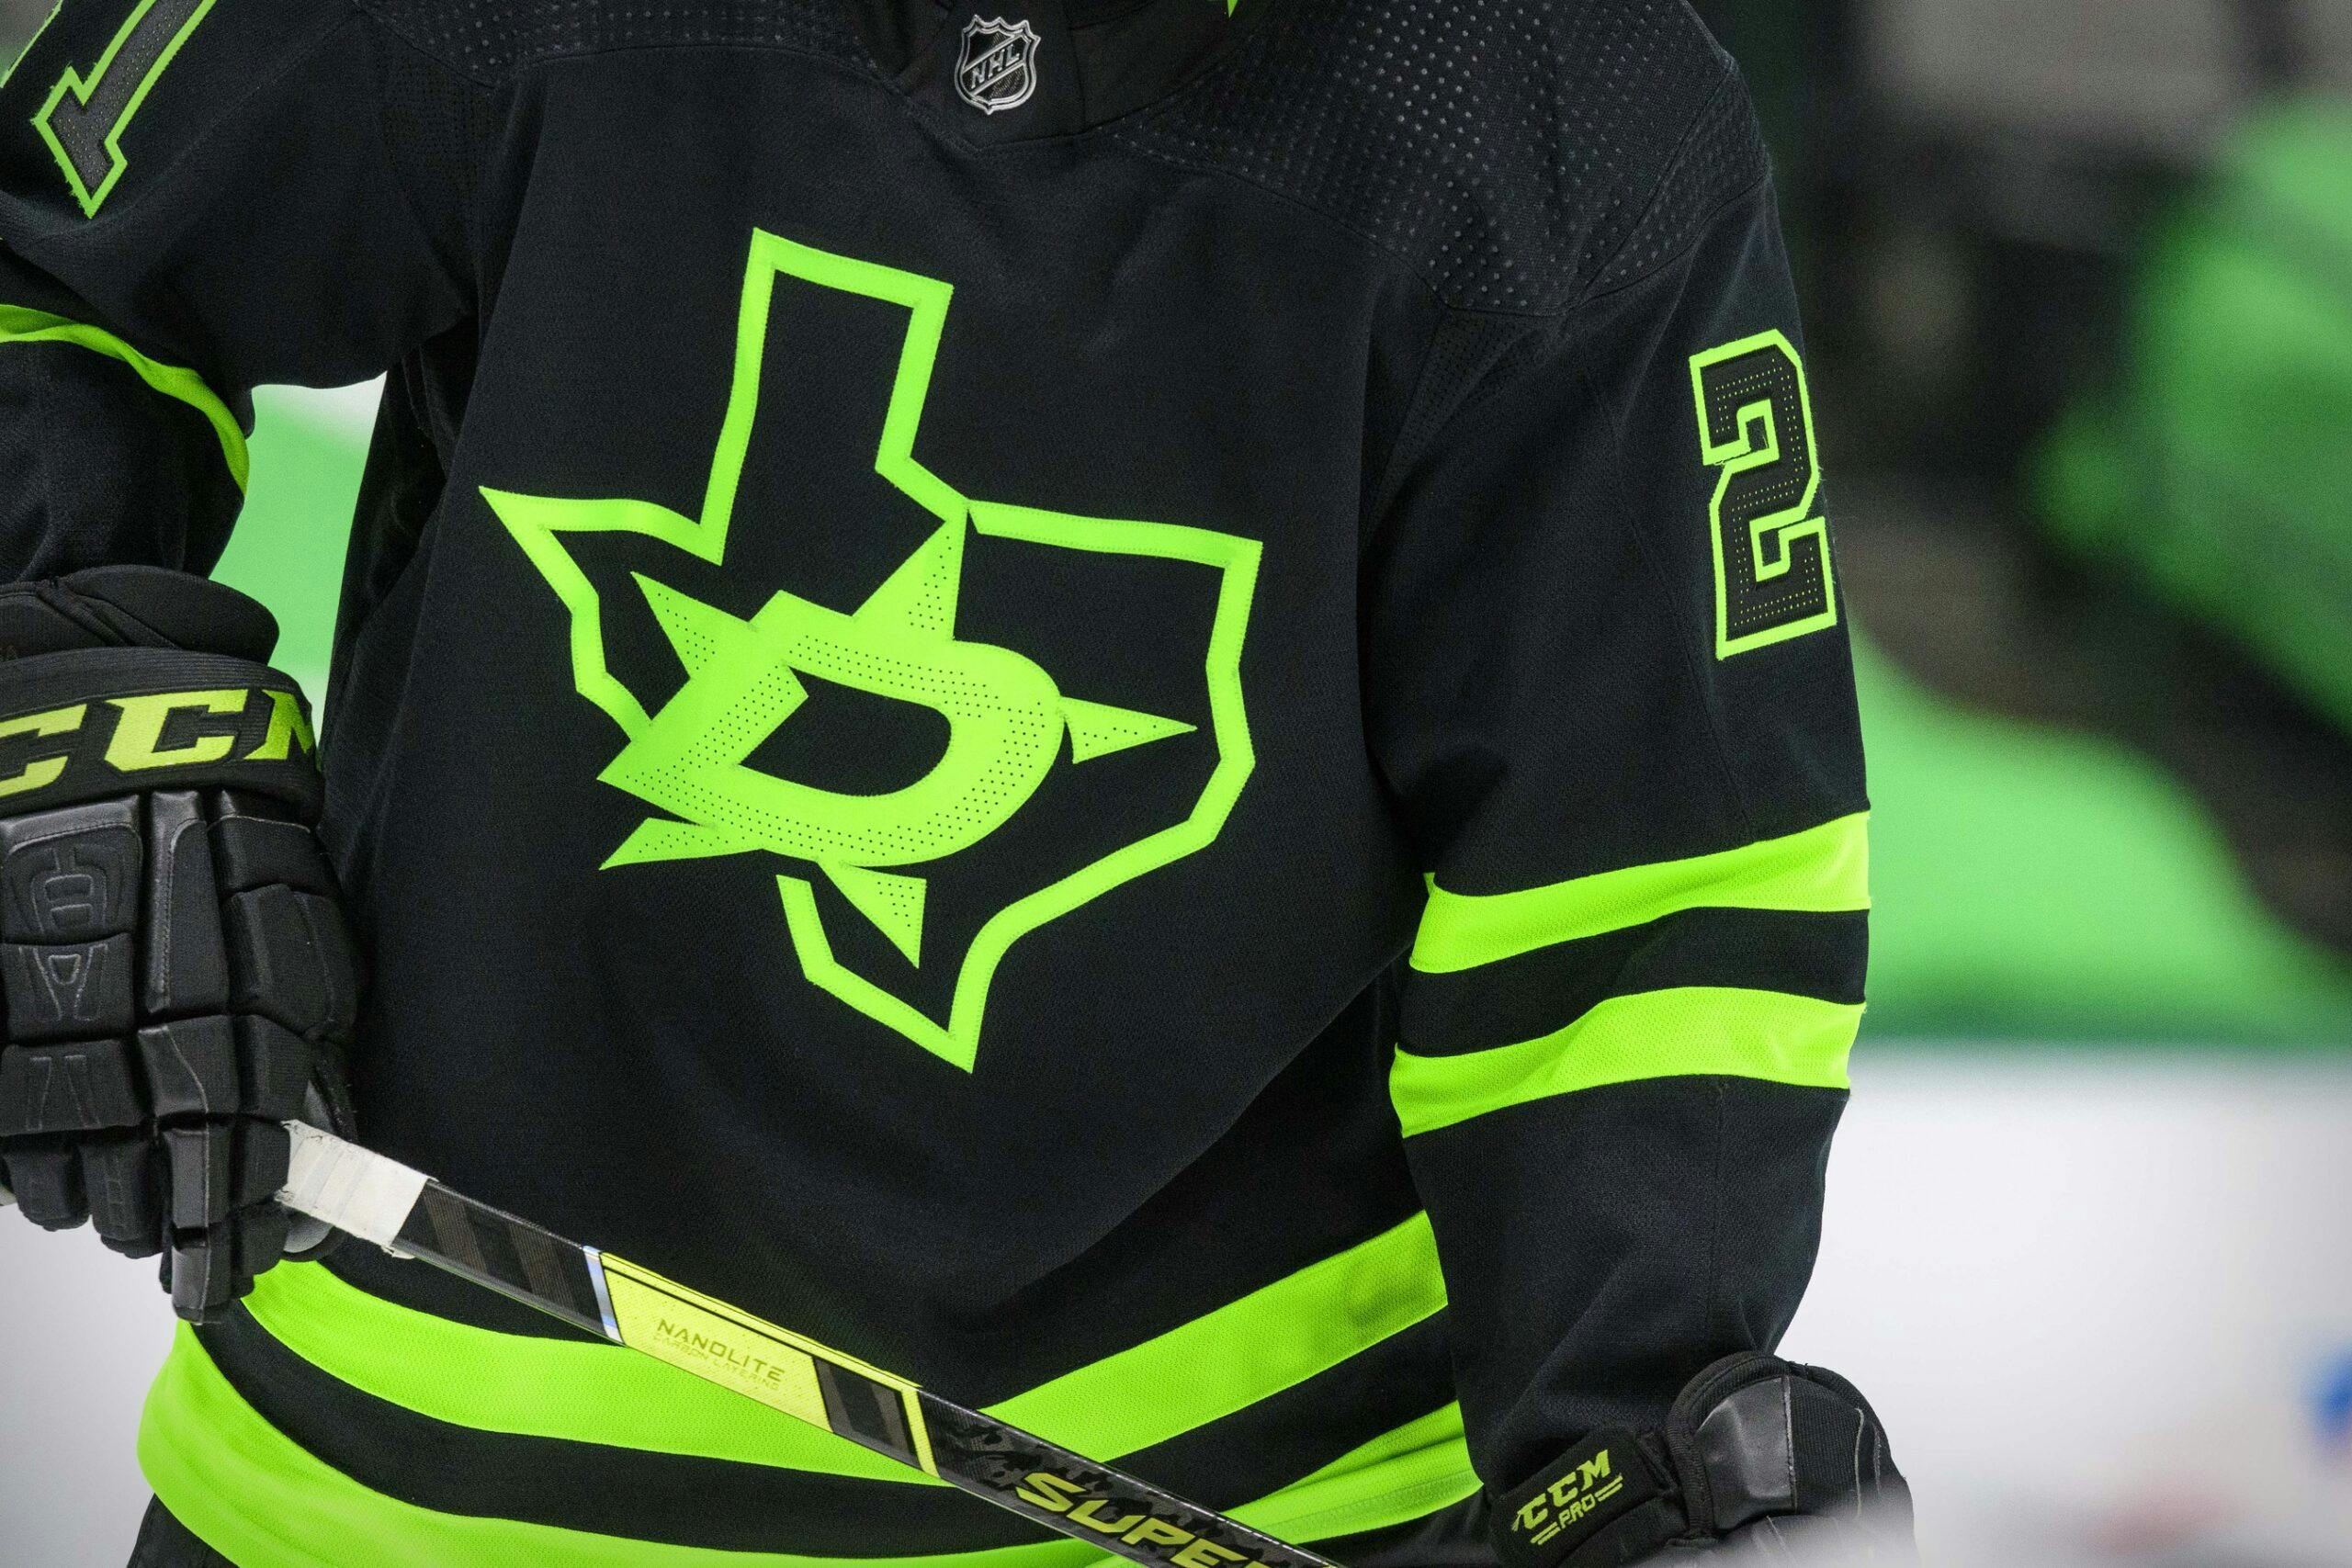 Fanatics Will Make NHL Uniforms After Adidas Contract Expires